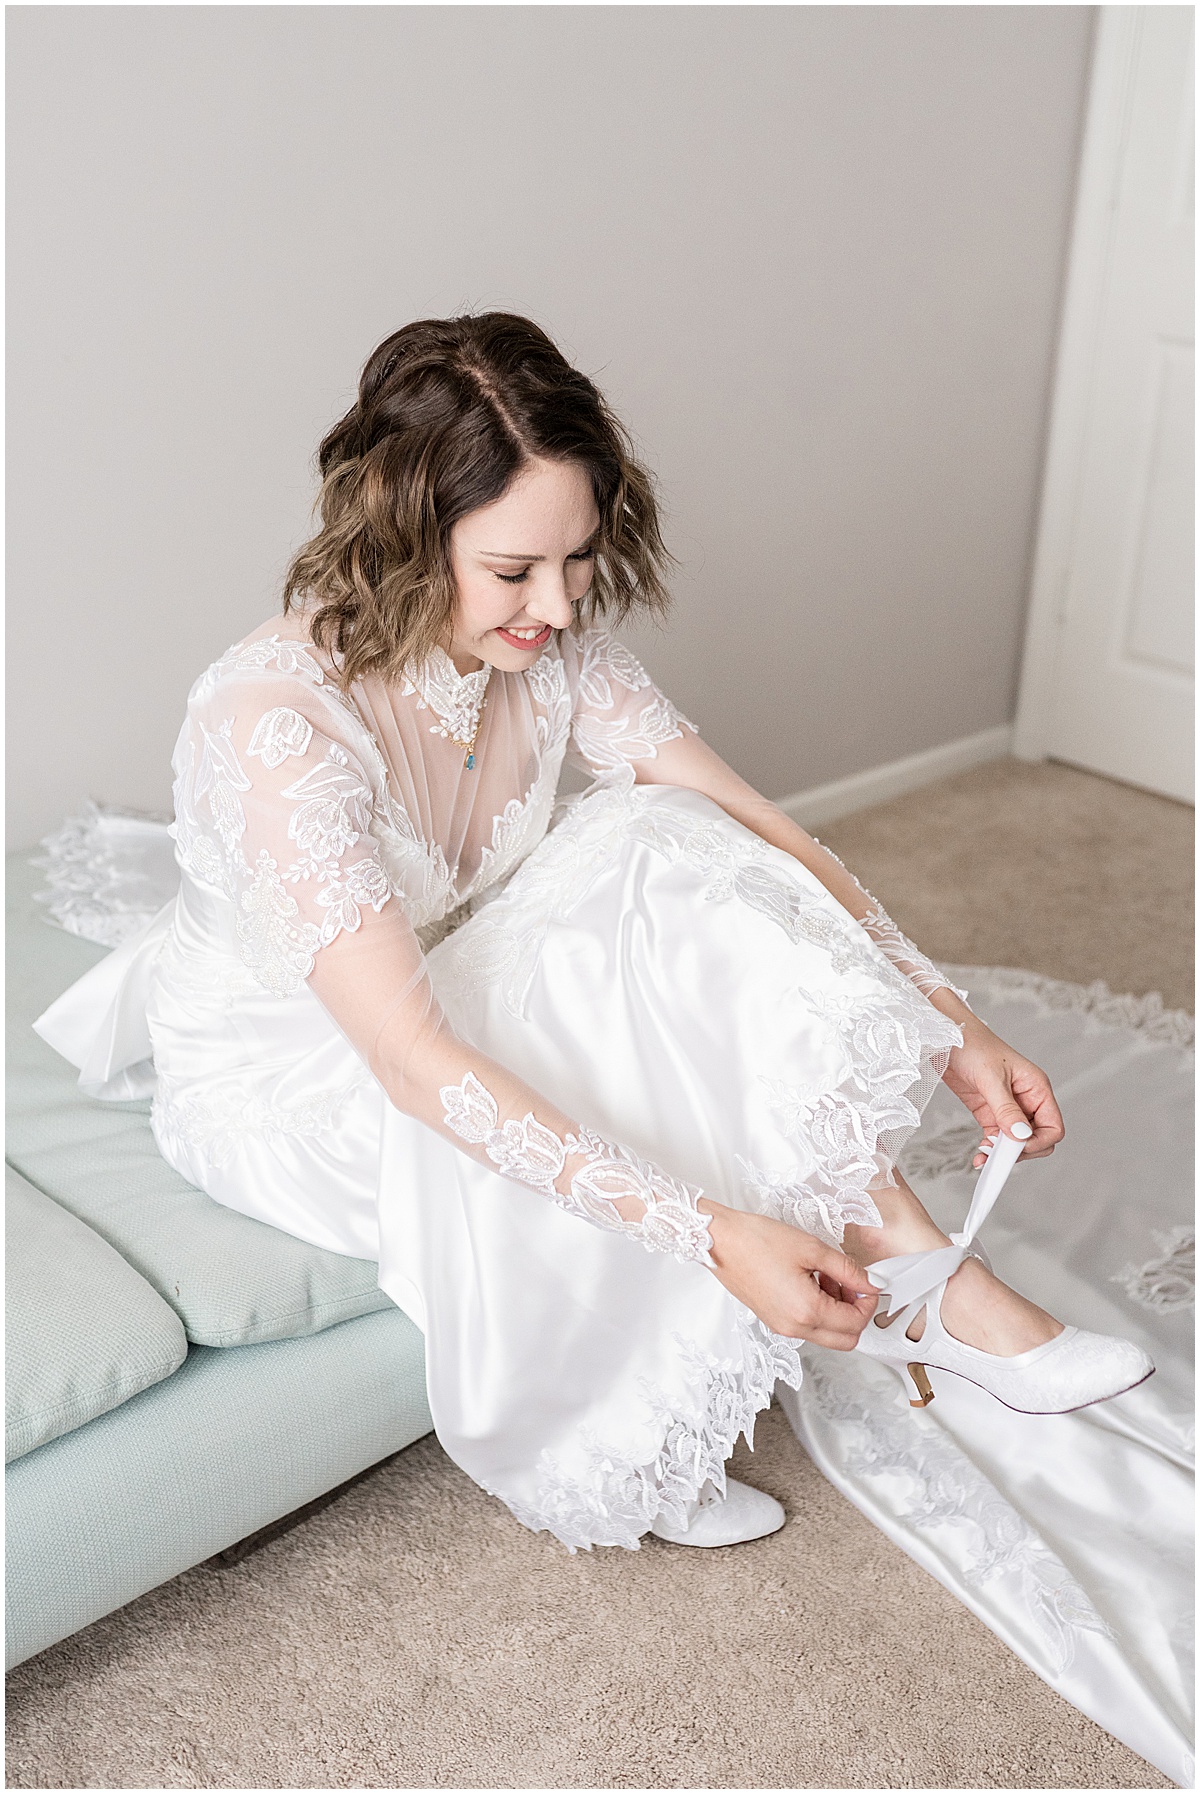 Bride putting on shoes with ribbon ties before wedding in Lafayette, Indiana